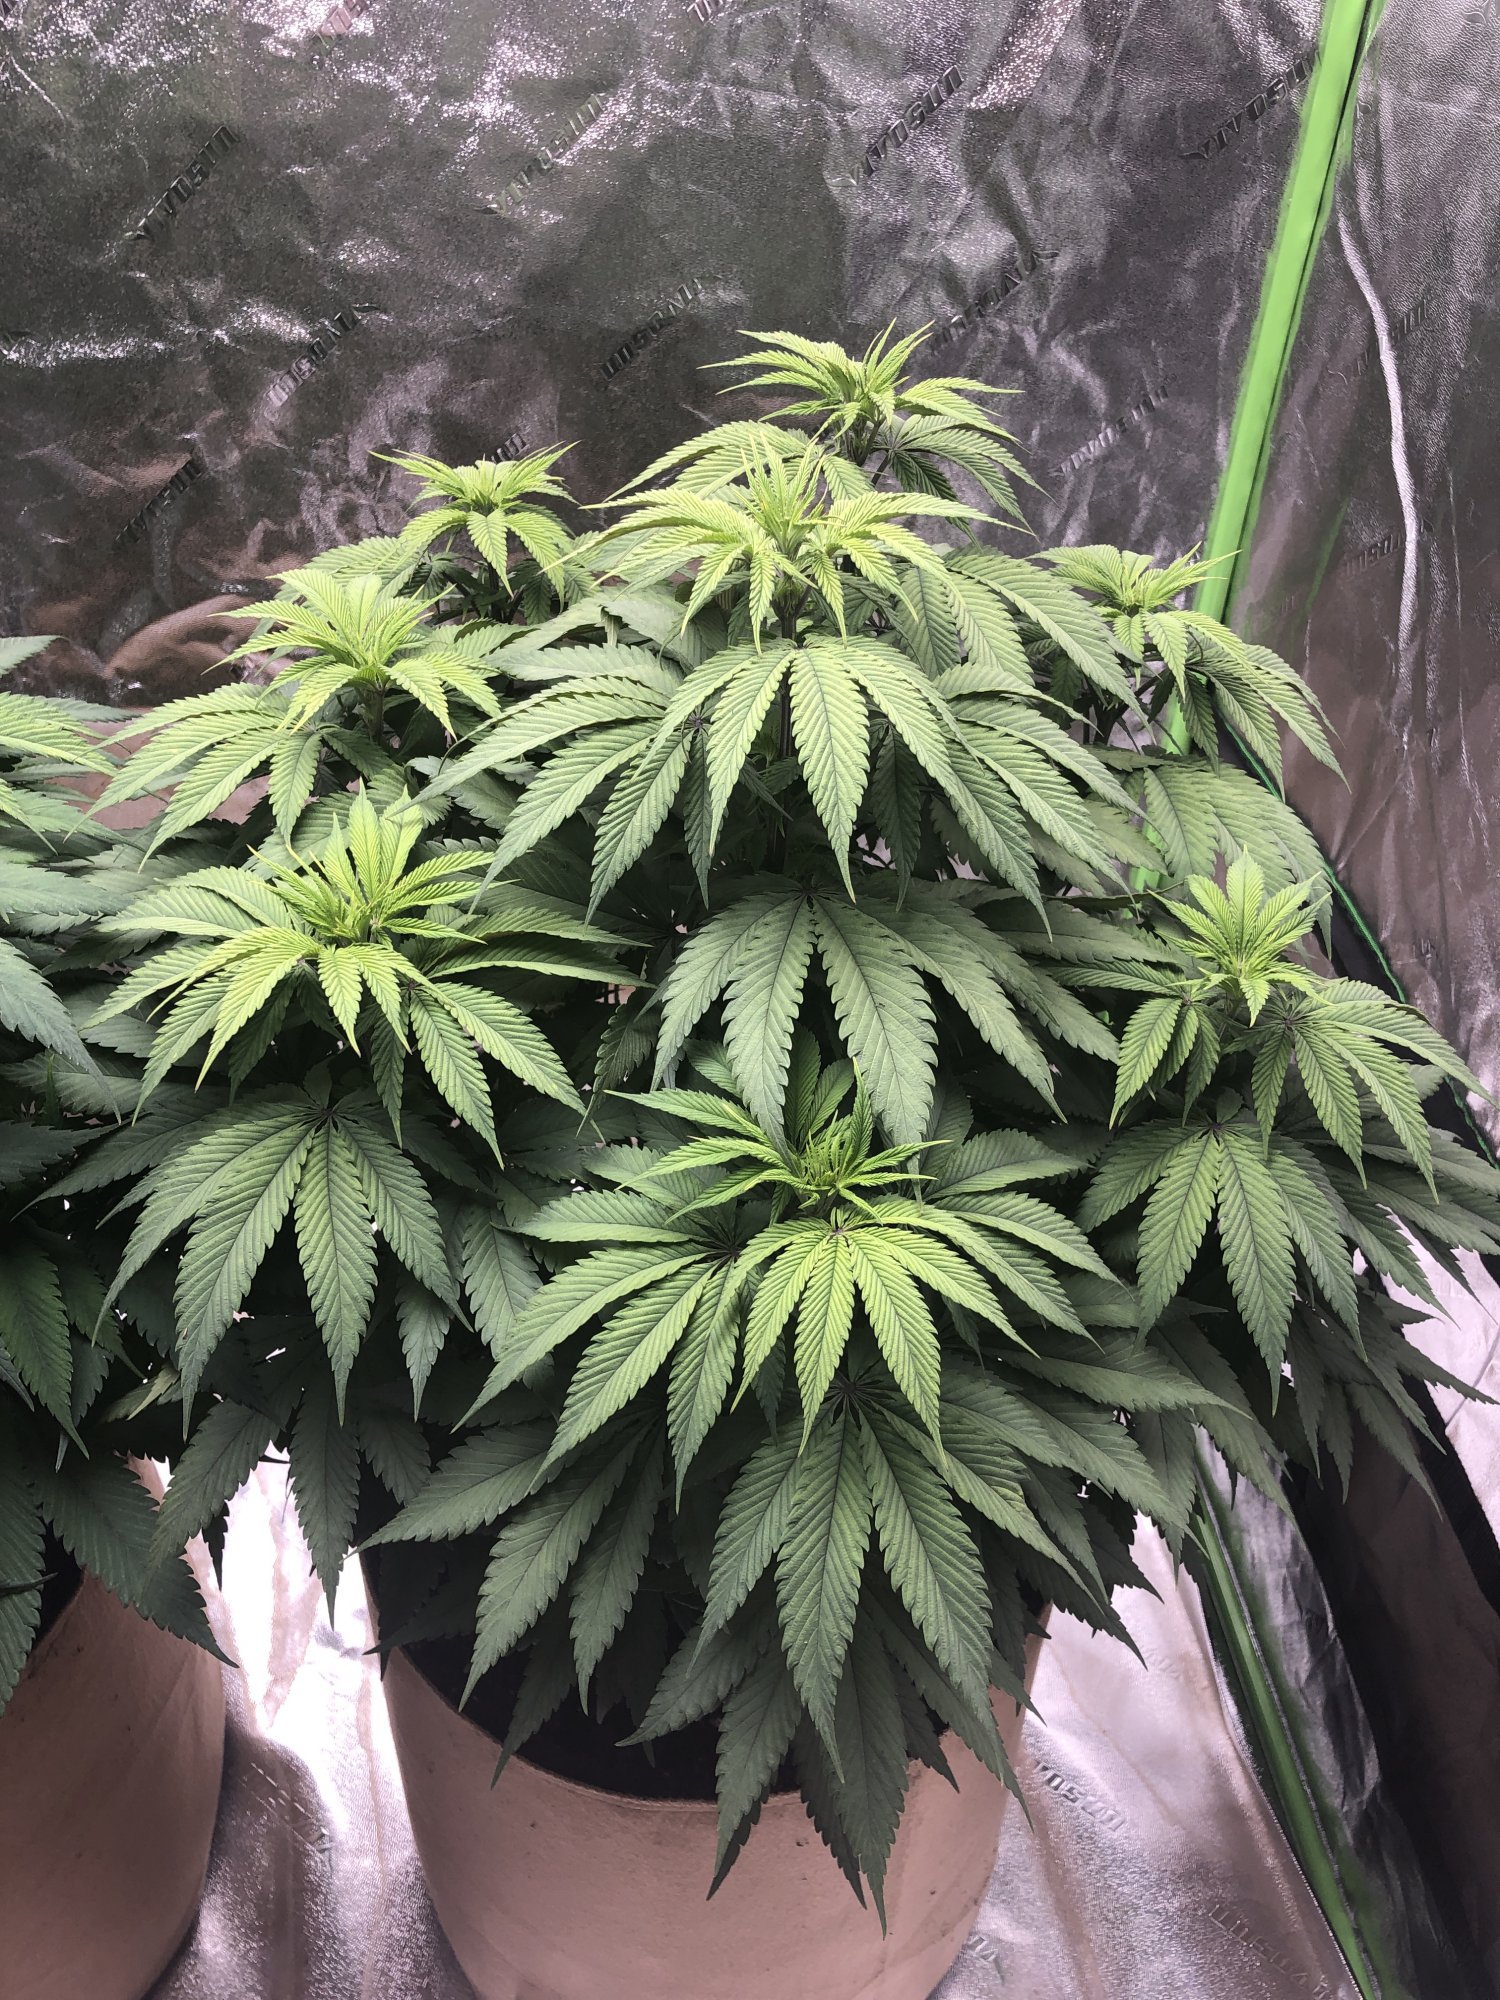 New to this forum and a first time weed grower need some advice and i have a few questions and